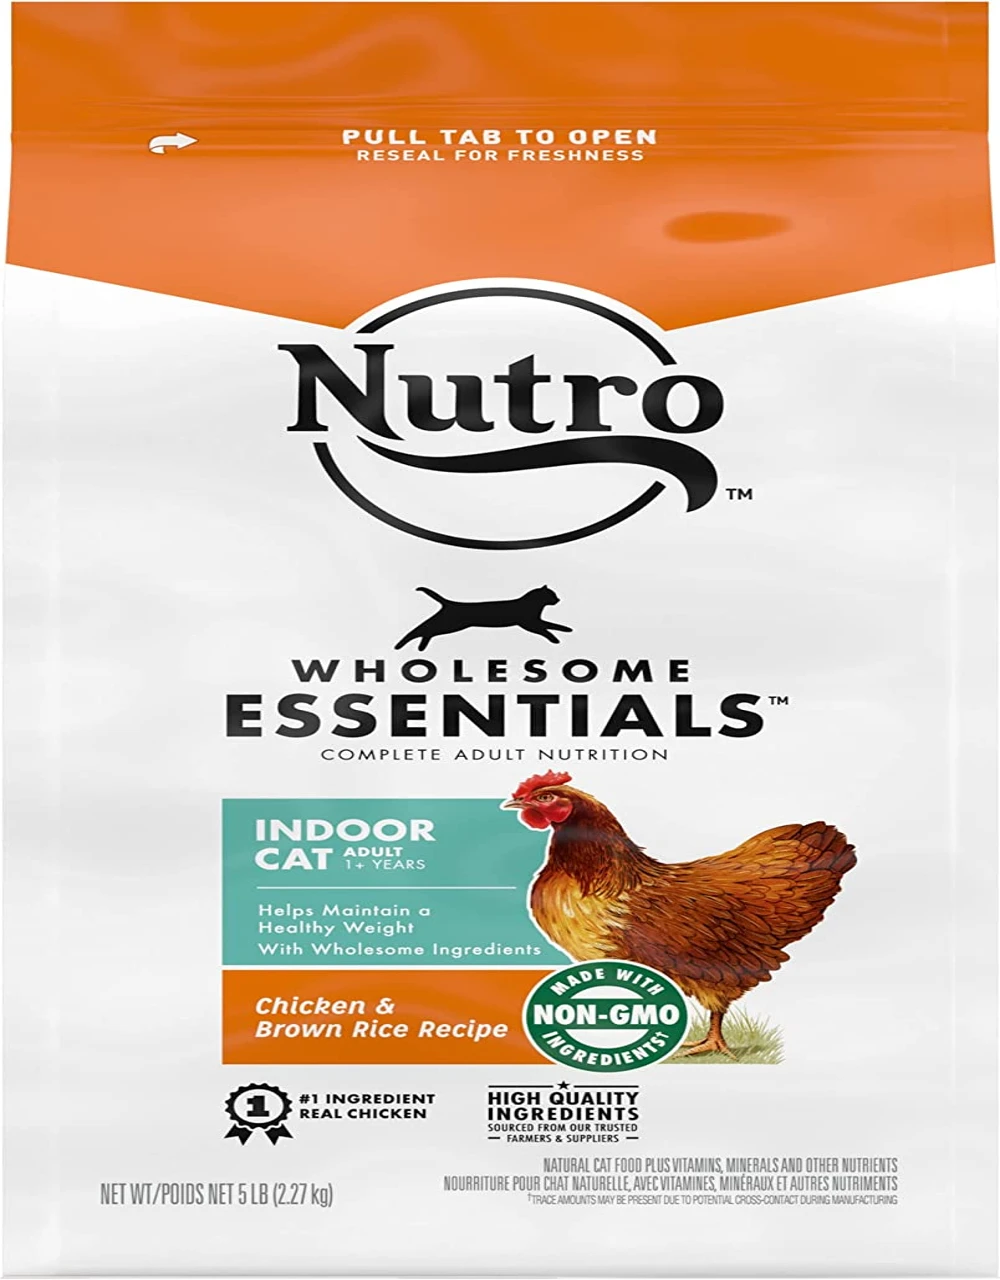 NUTRO WHOLESOME ESSENTIALS Indoor Cat Adult Chicken and Brown Rice Recipe Natural Cat Food